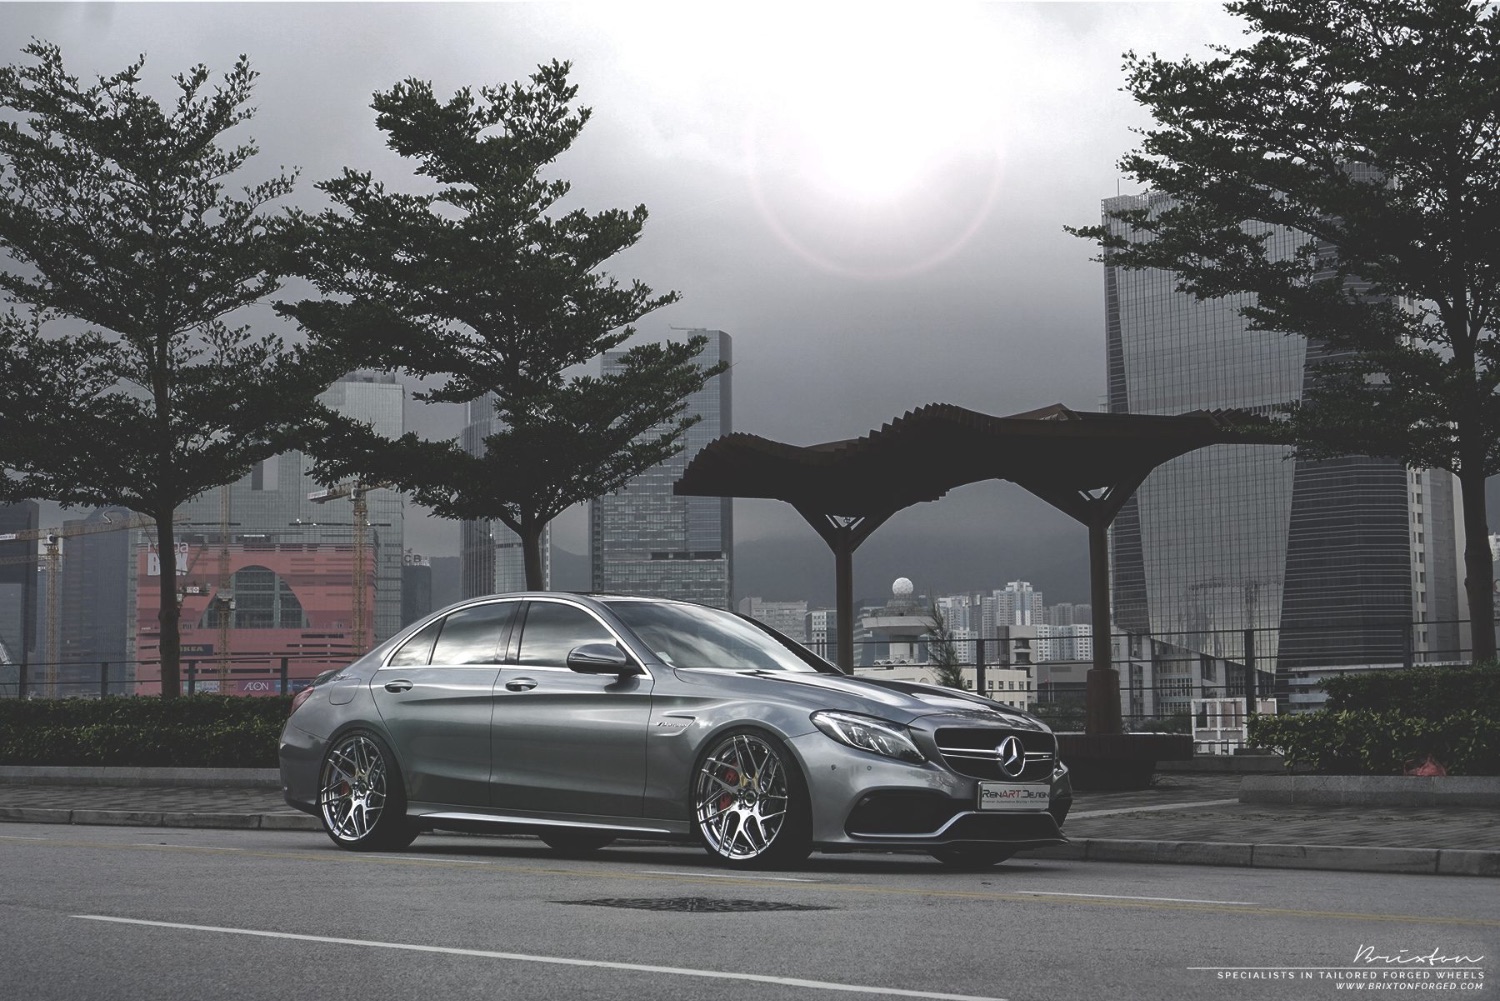 brixton-forged-mercedes-benz-silver-c63s-amg-20-inch-brixton-forged-cm7-duo-series-2-piece-forged-wheels-polished-05-1800x1202